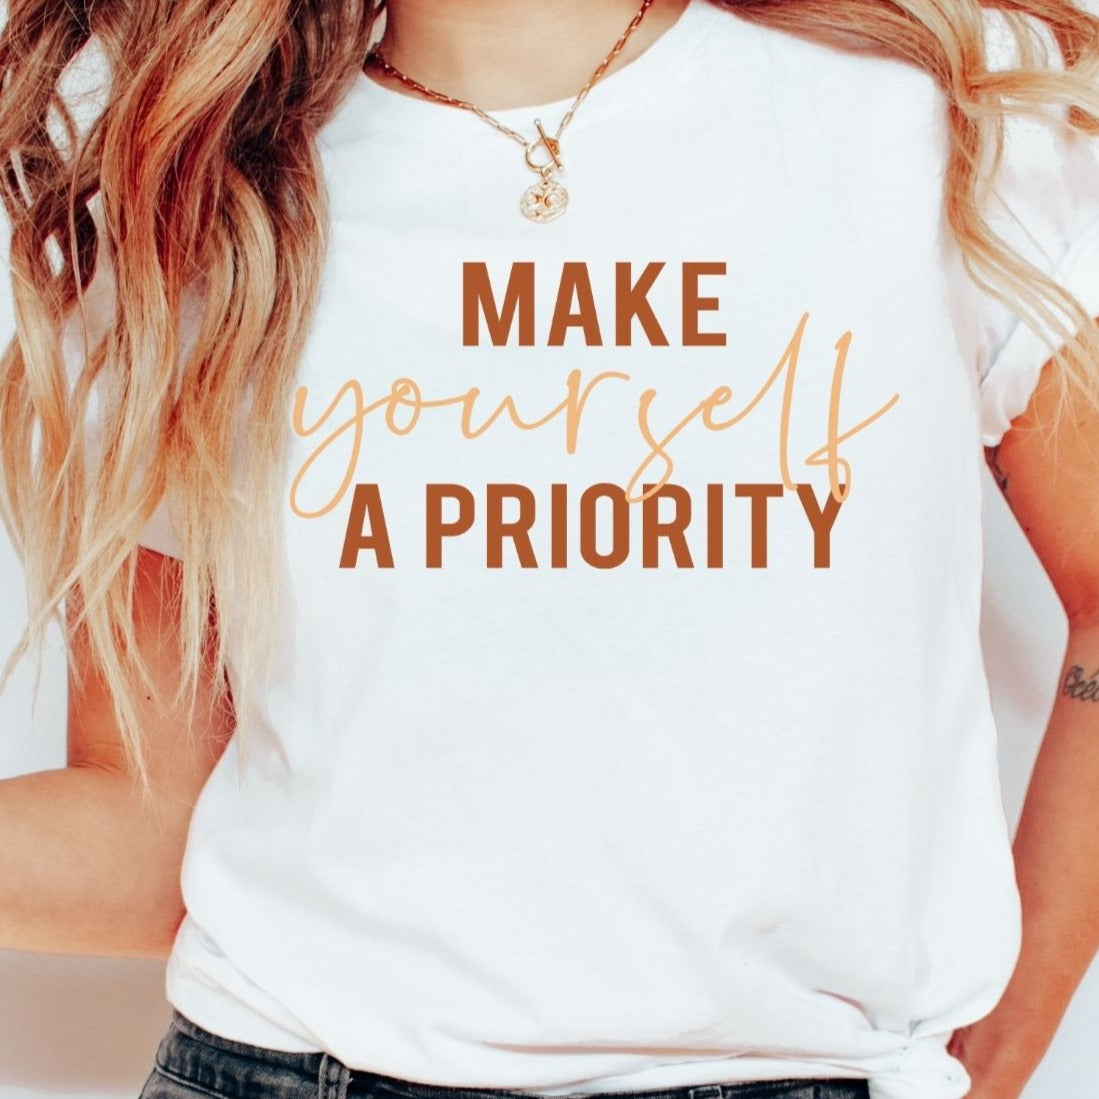 MAKE YOURSELF A PRIORITY